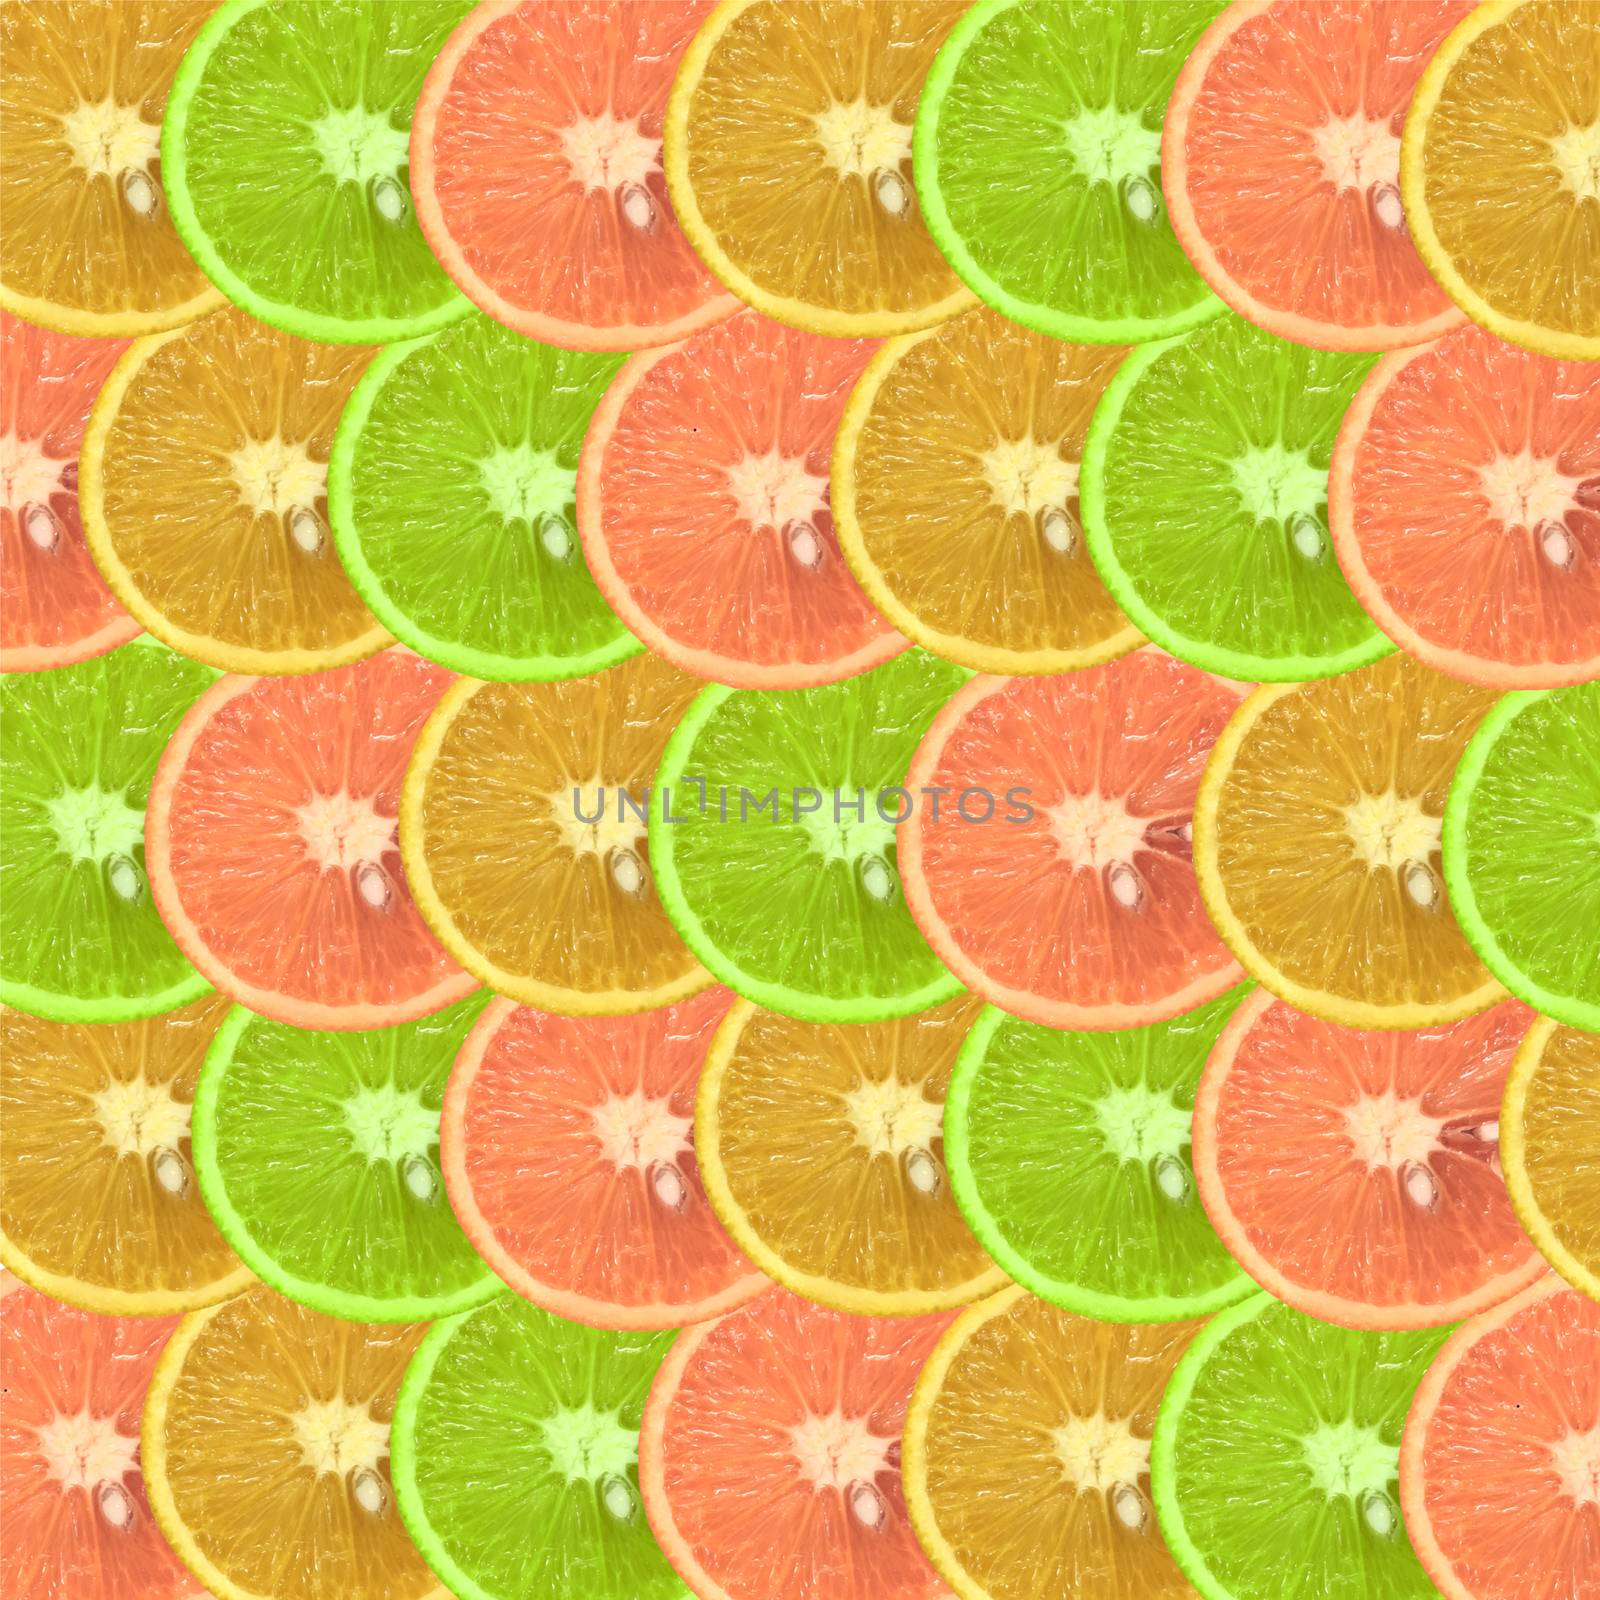 Colorful fruit pattern of fresh orange slices. Top view background.